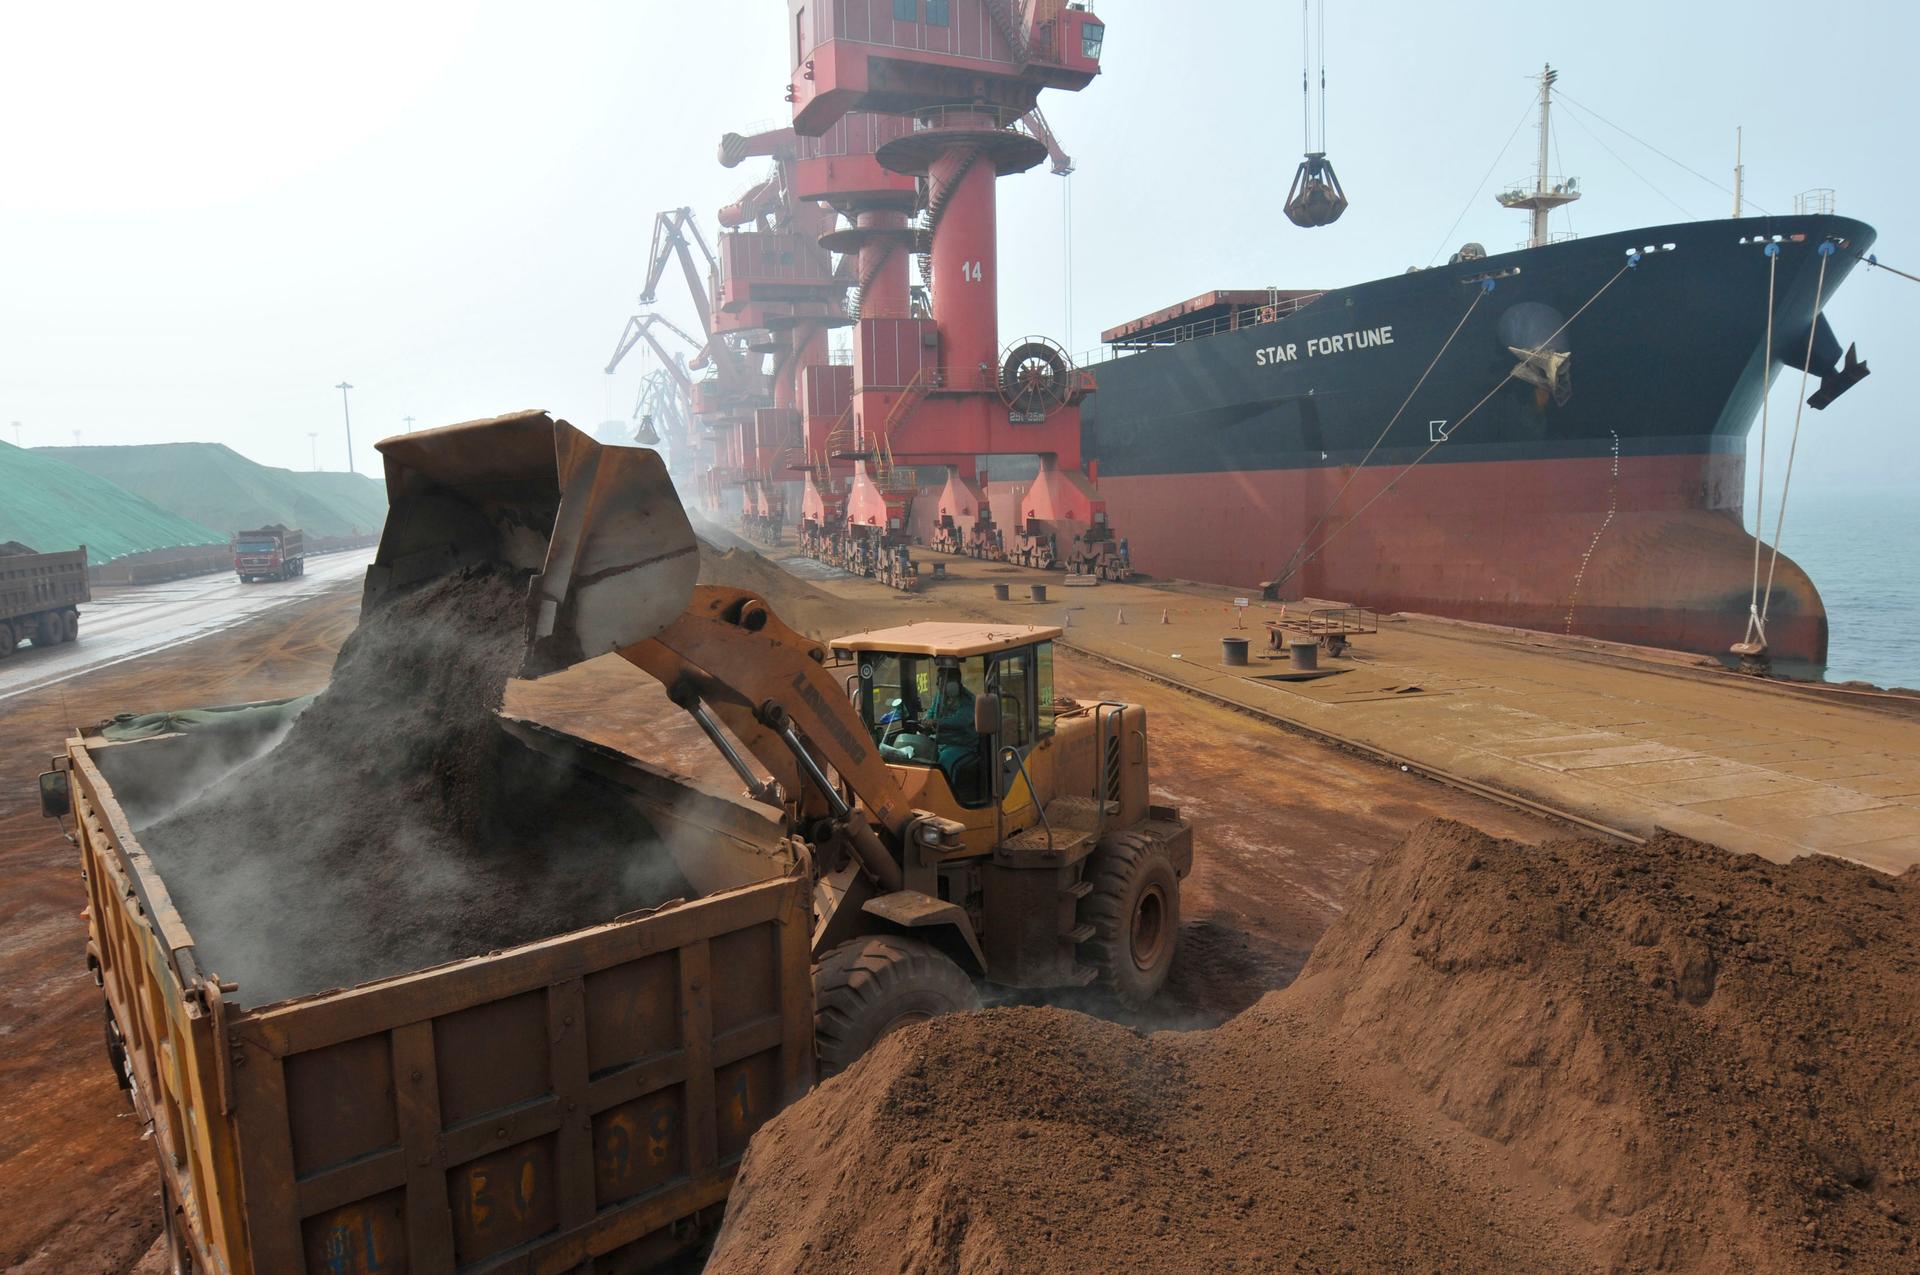 Iron ore is unloaded from the Star Fortune bulk carrier at Rizhao Port, one of China's biggest ports for importing the commodity, in Shandong province, in March 2010.